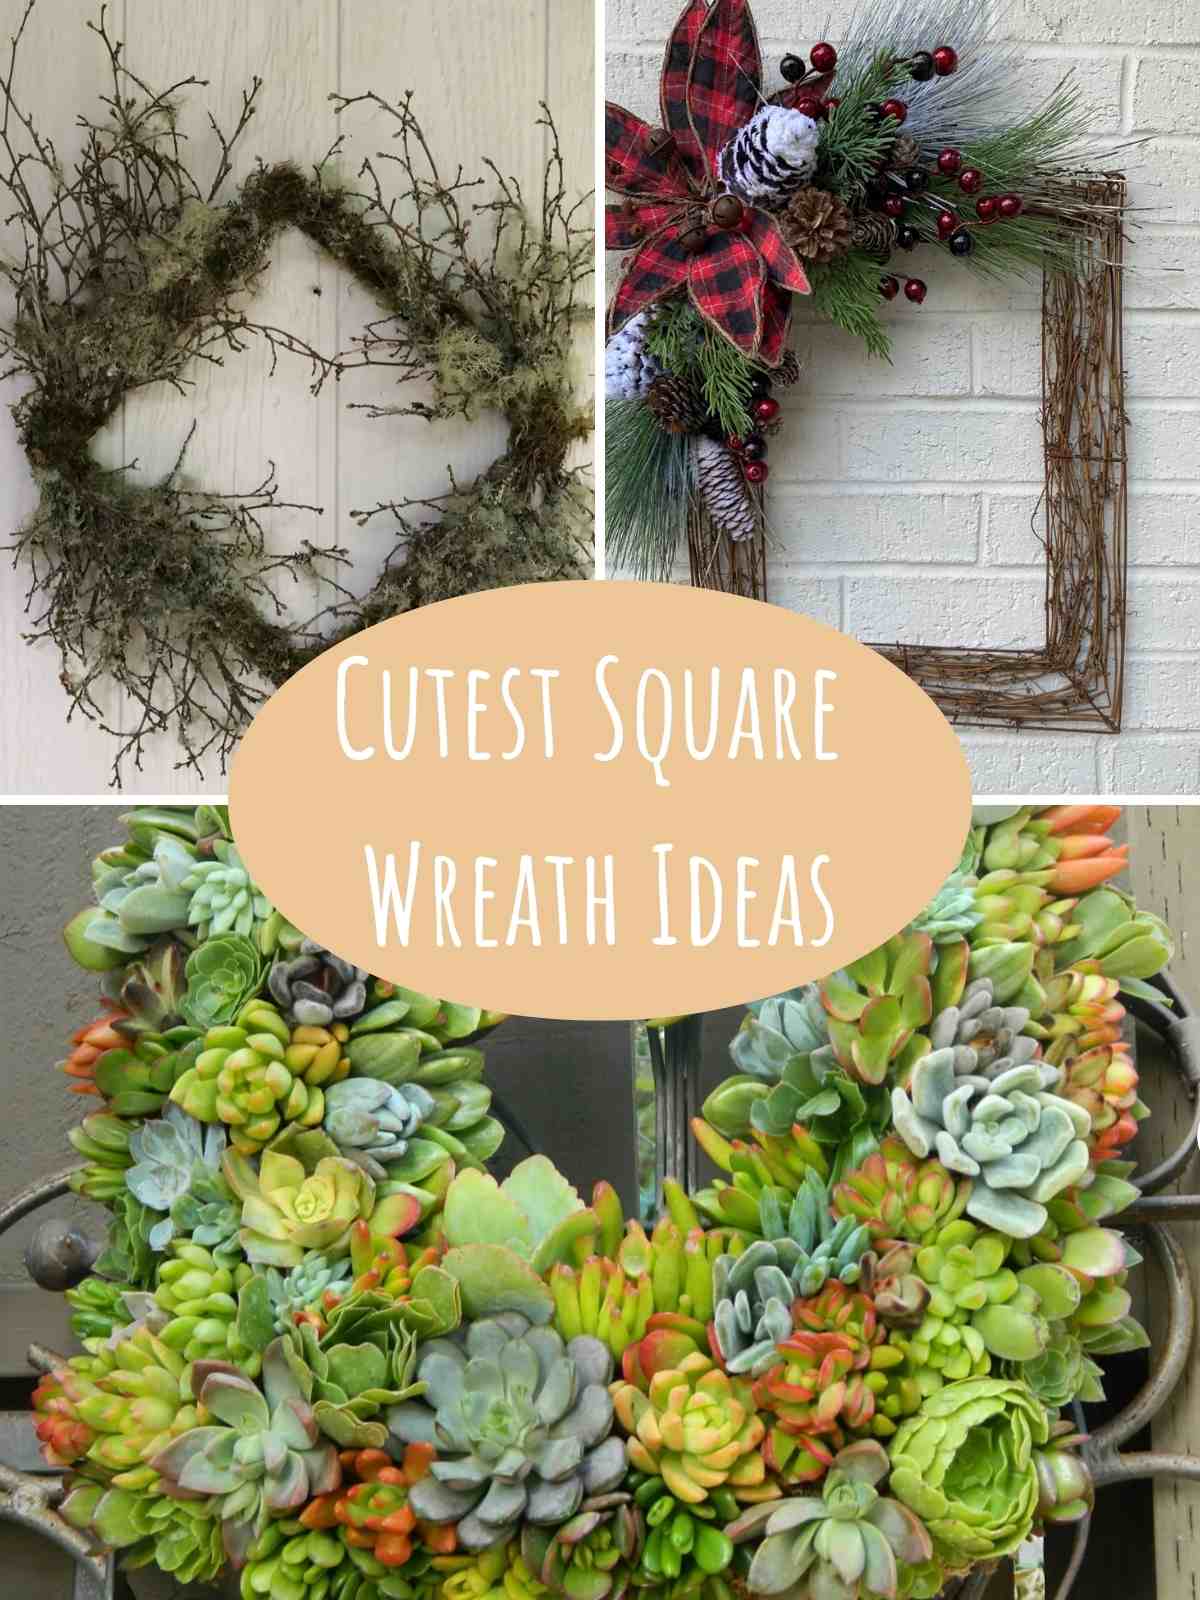 Cutest Square frames for wreaths